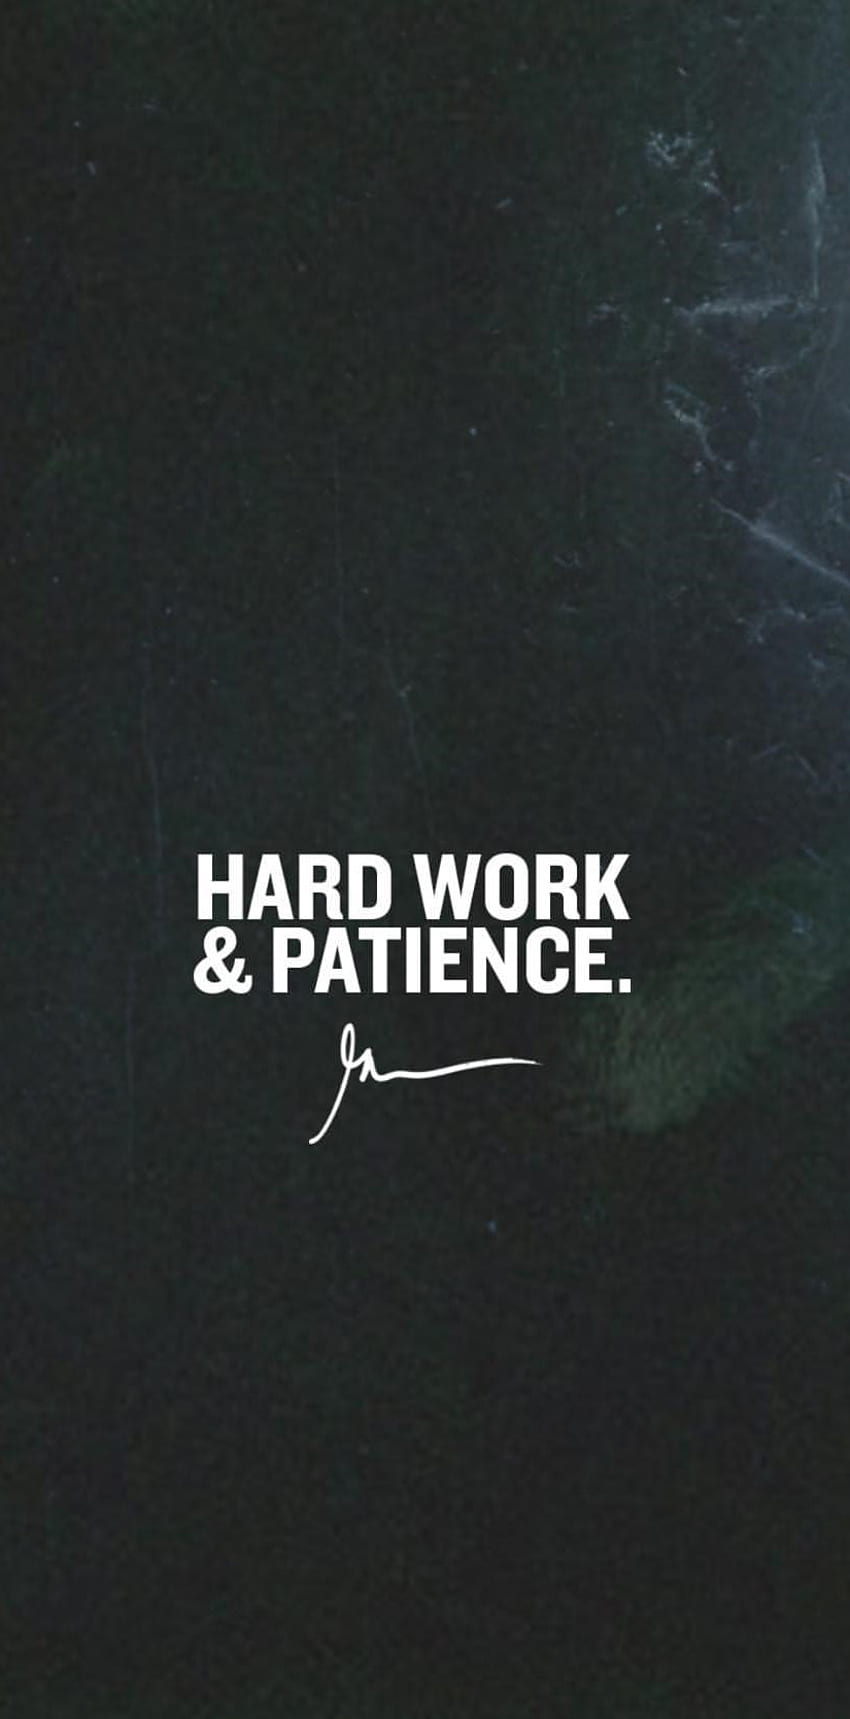 Work Hard Play Hard iPhone Wallpapers Free Download